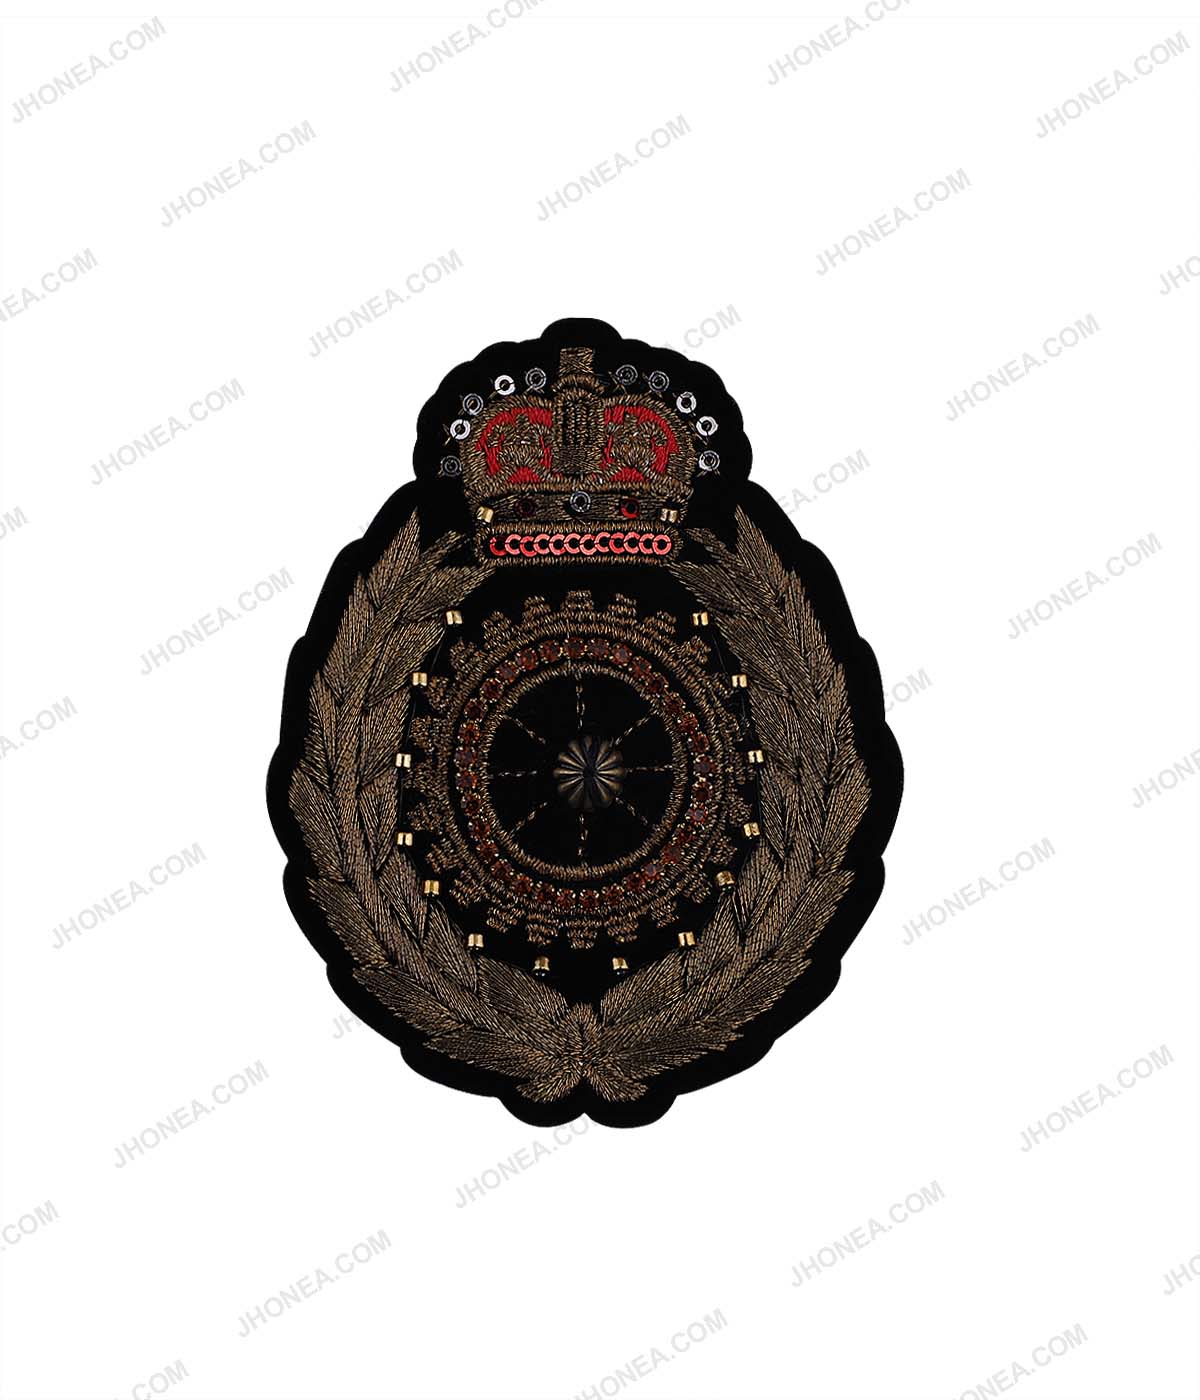 Decorative Diamond Embroidery Patches for Designer Clothes